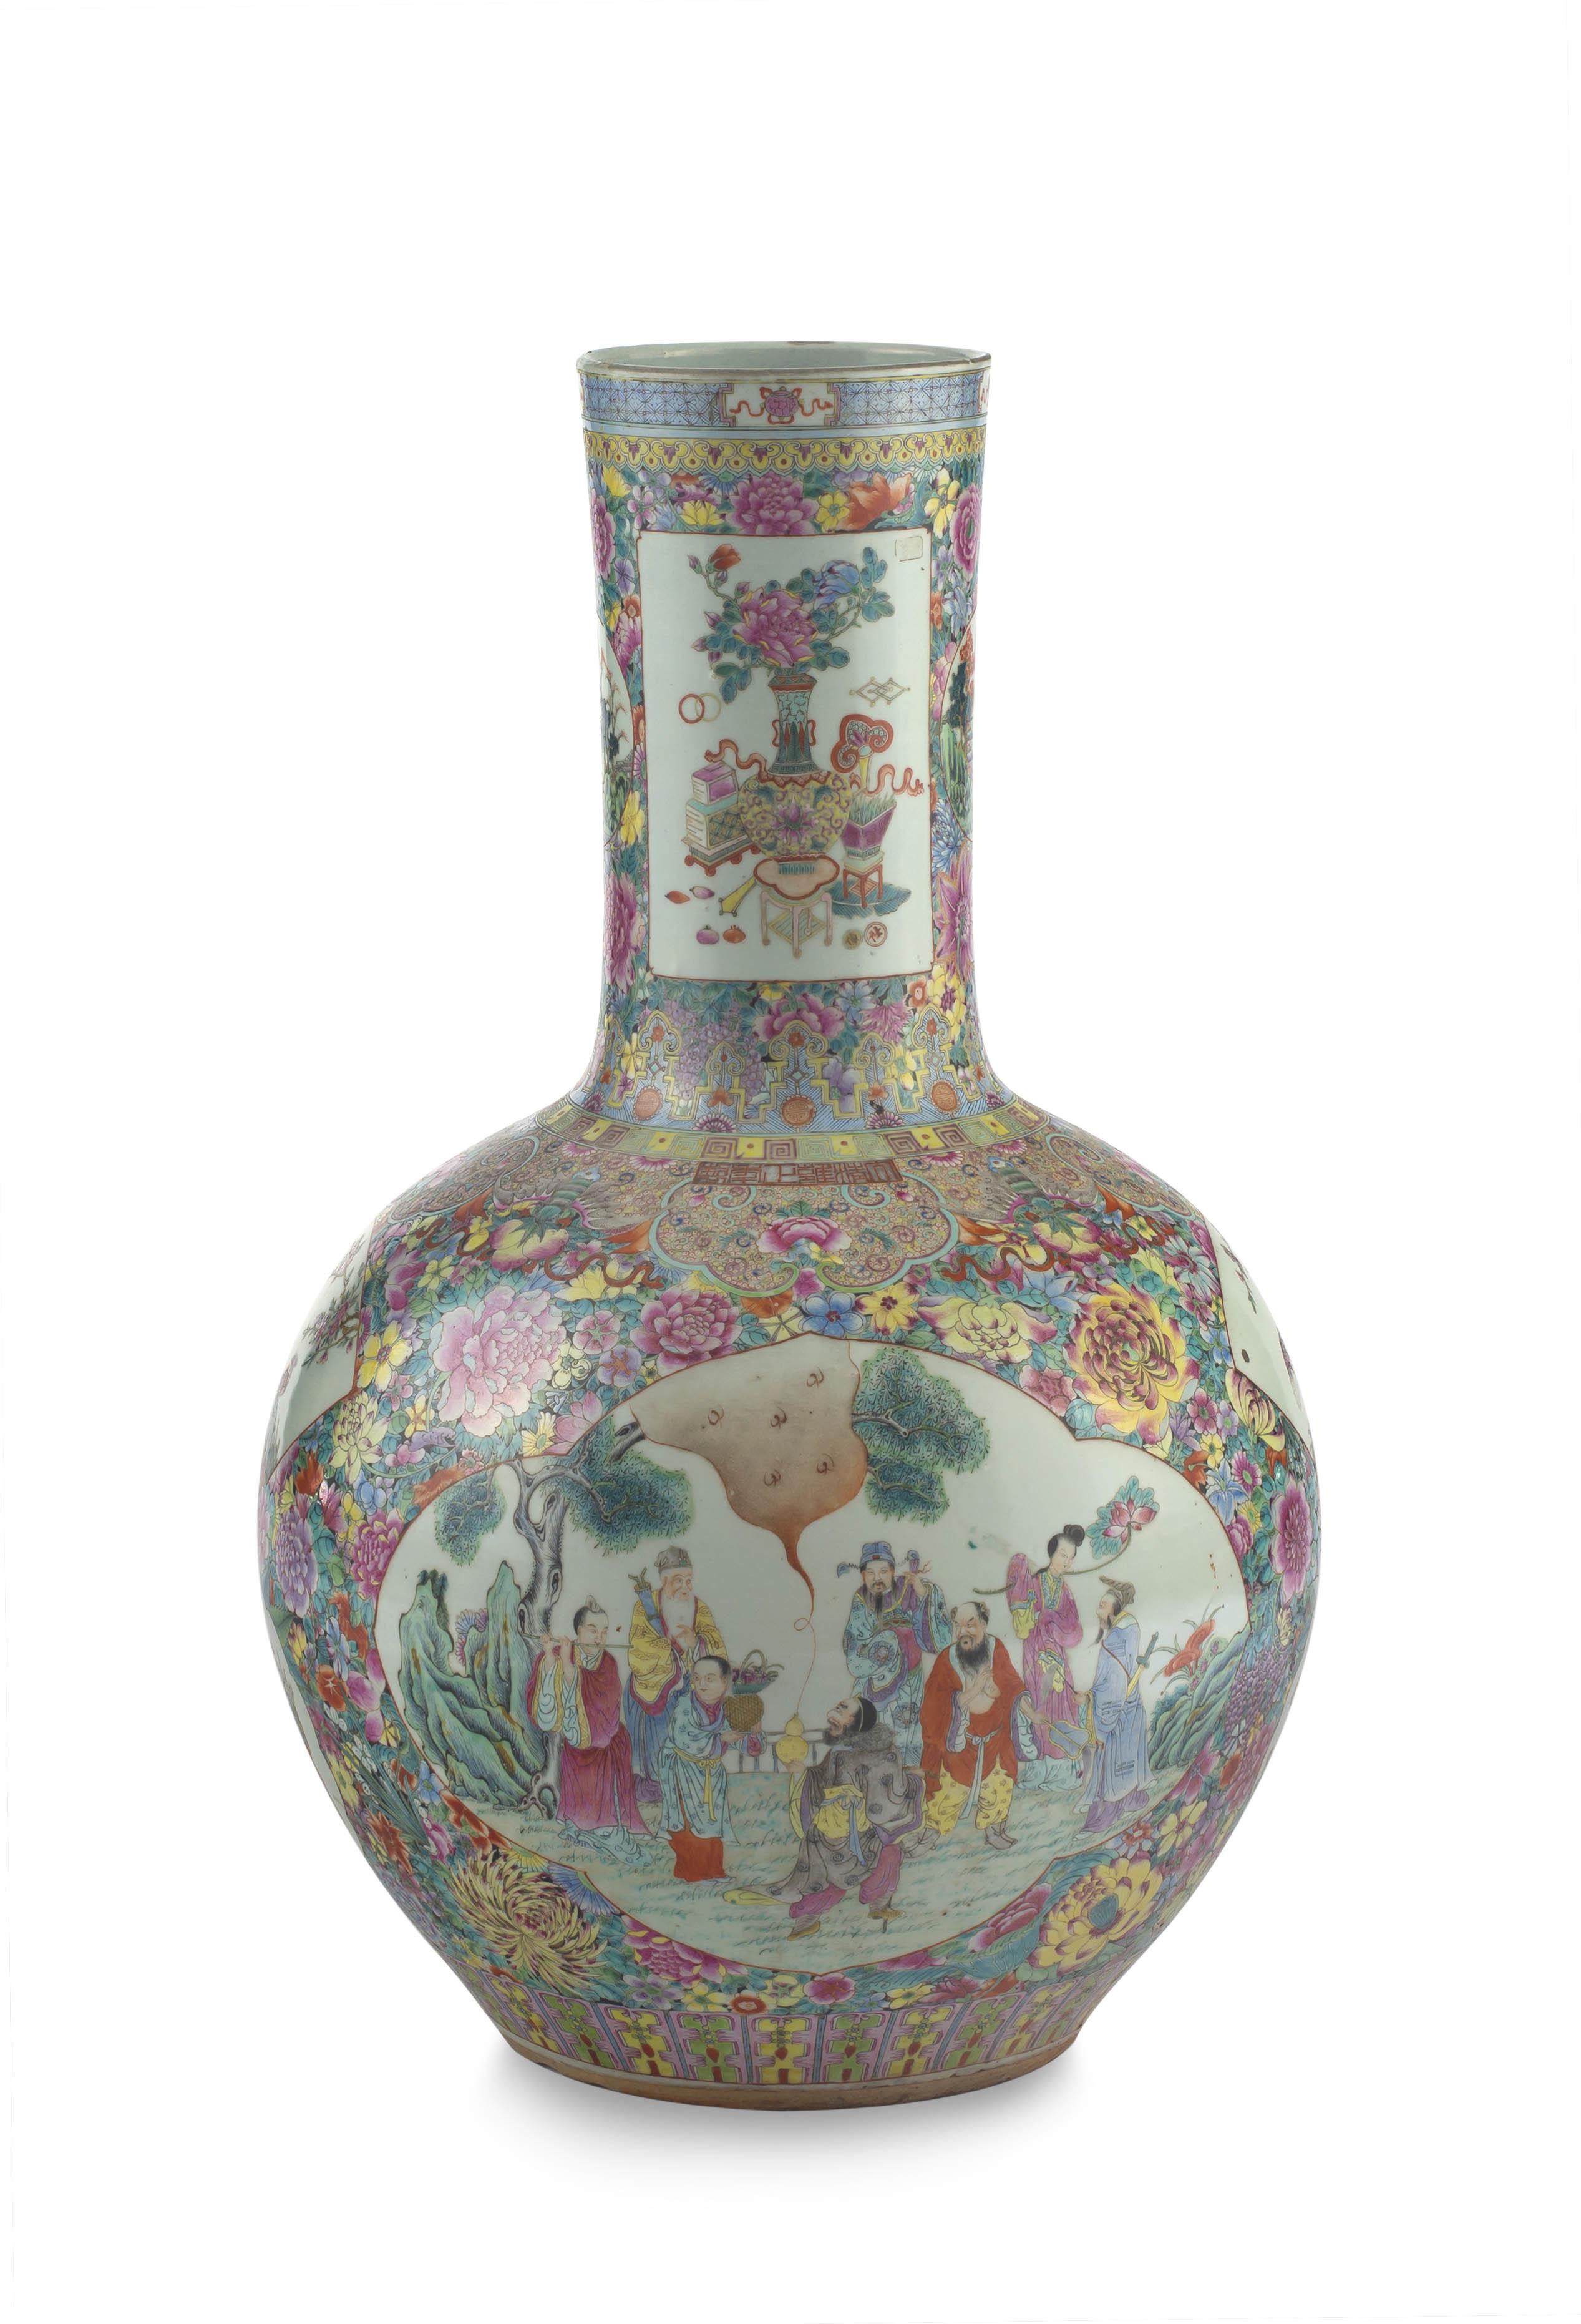 A large Chinese famille-rose vase, Qing Dynasty, 19th century